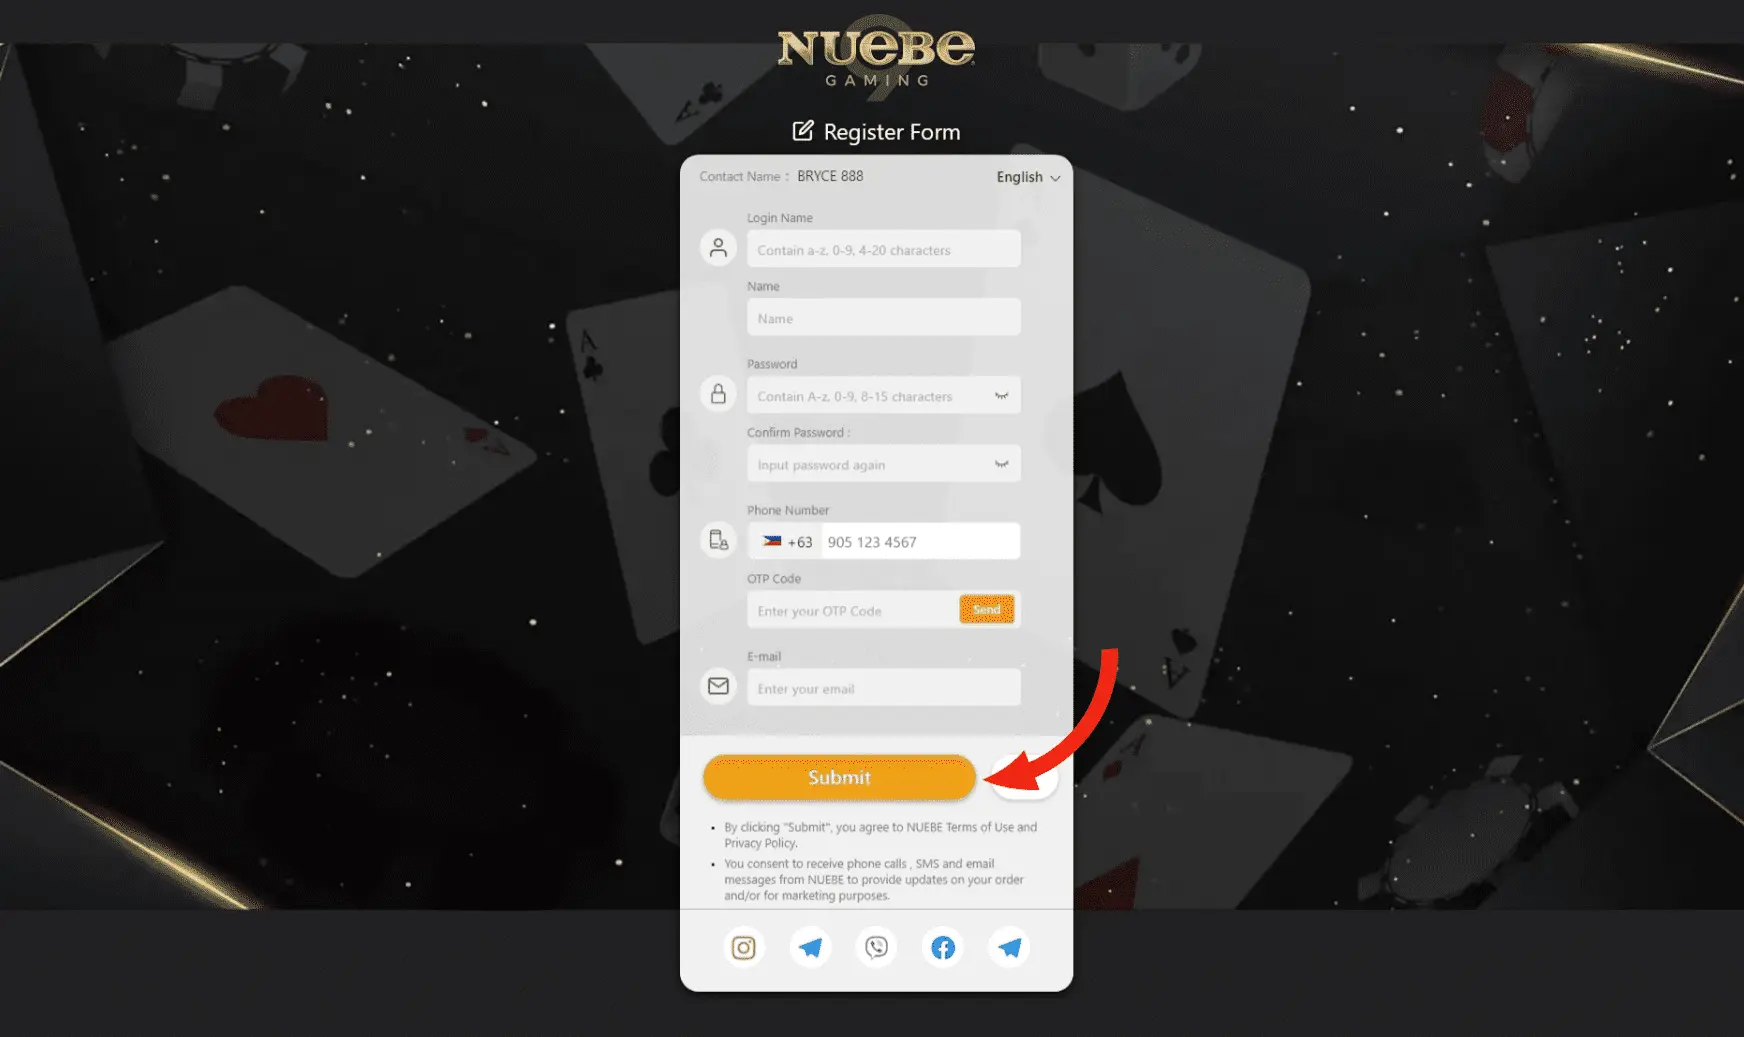 Final step of the Nuebe Gaming sign up form, showcasing the 'Submit' button ready for new members to confirm their details.